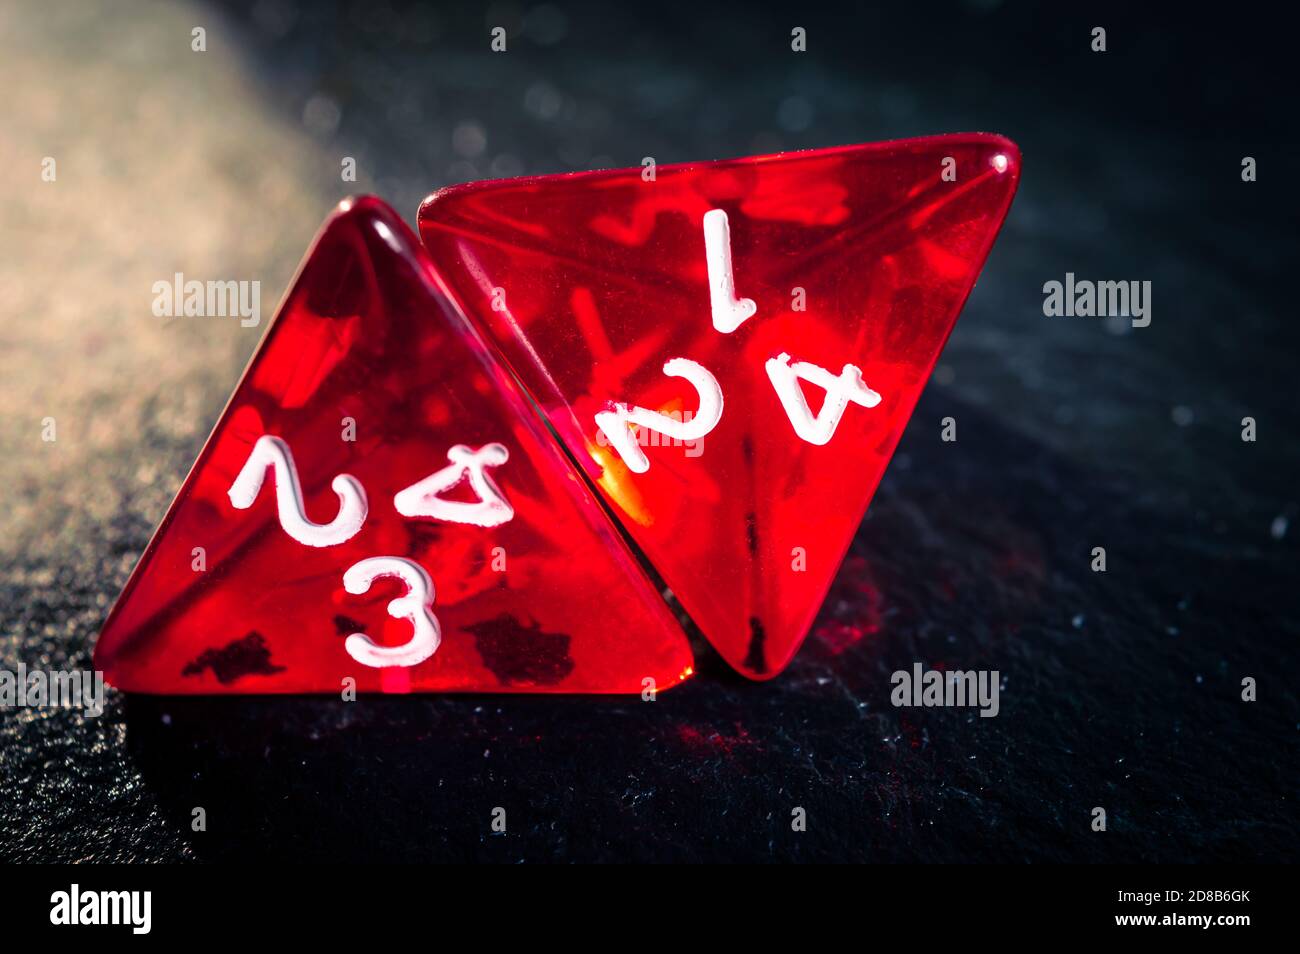 D4 Dice: 4-Sided Dice, Types of Polyhedral Dice